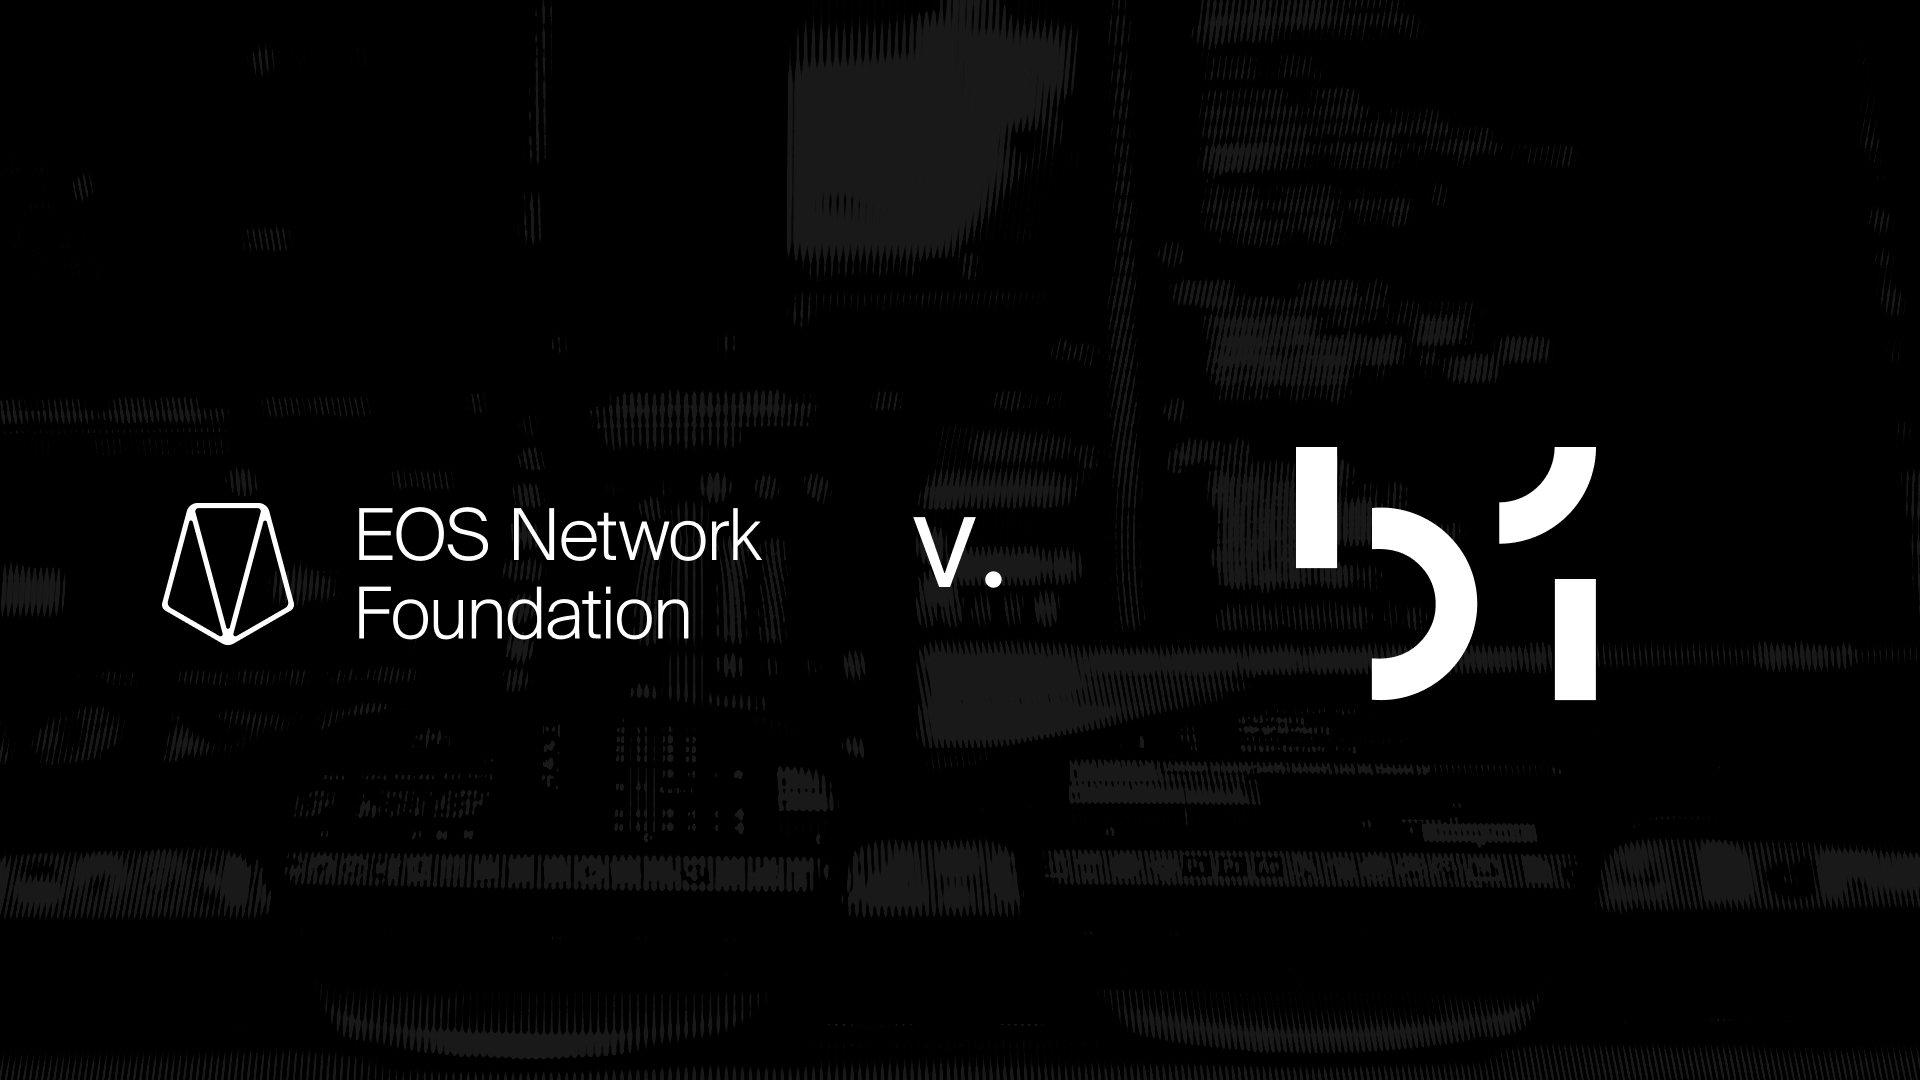 Block.one Faces Lawsuit from EOS Network Foundation